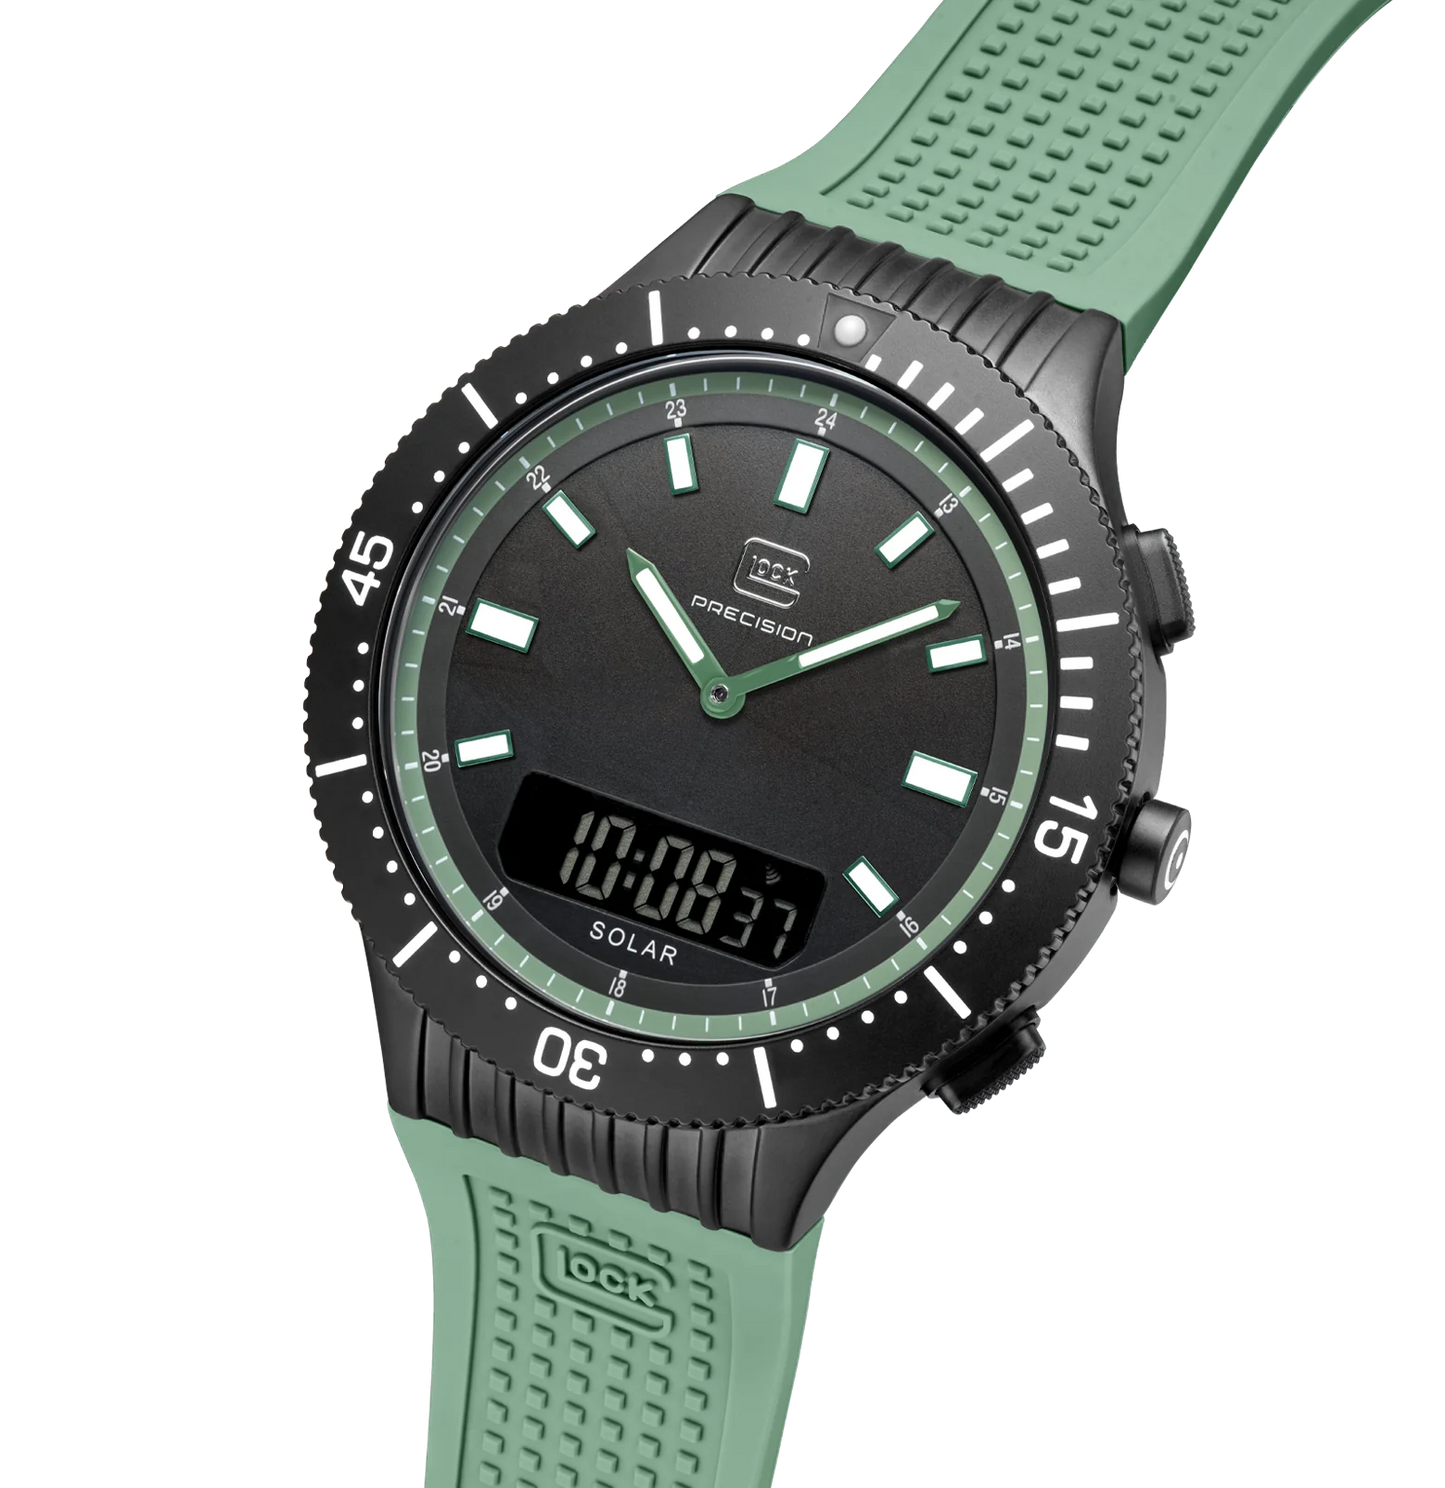 Men's Combo Solar/Digital/Analog Watch in Black/Mint Green with Silicone Band